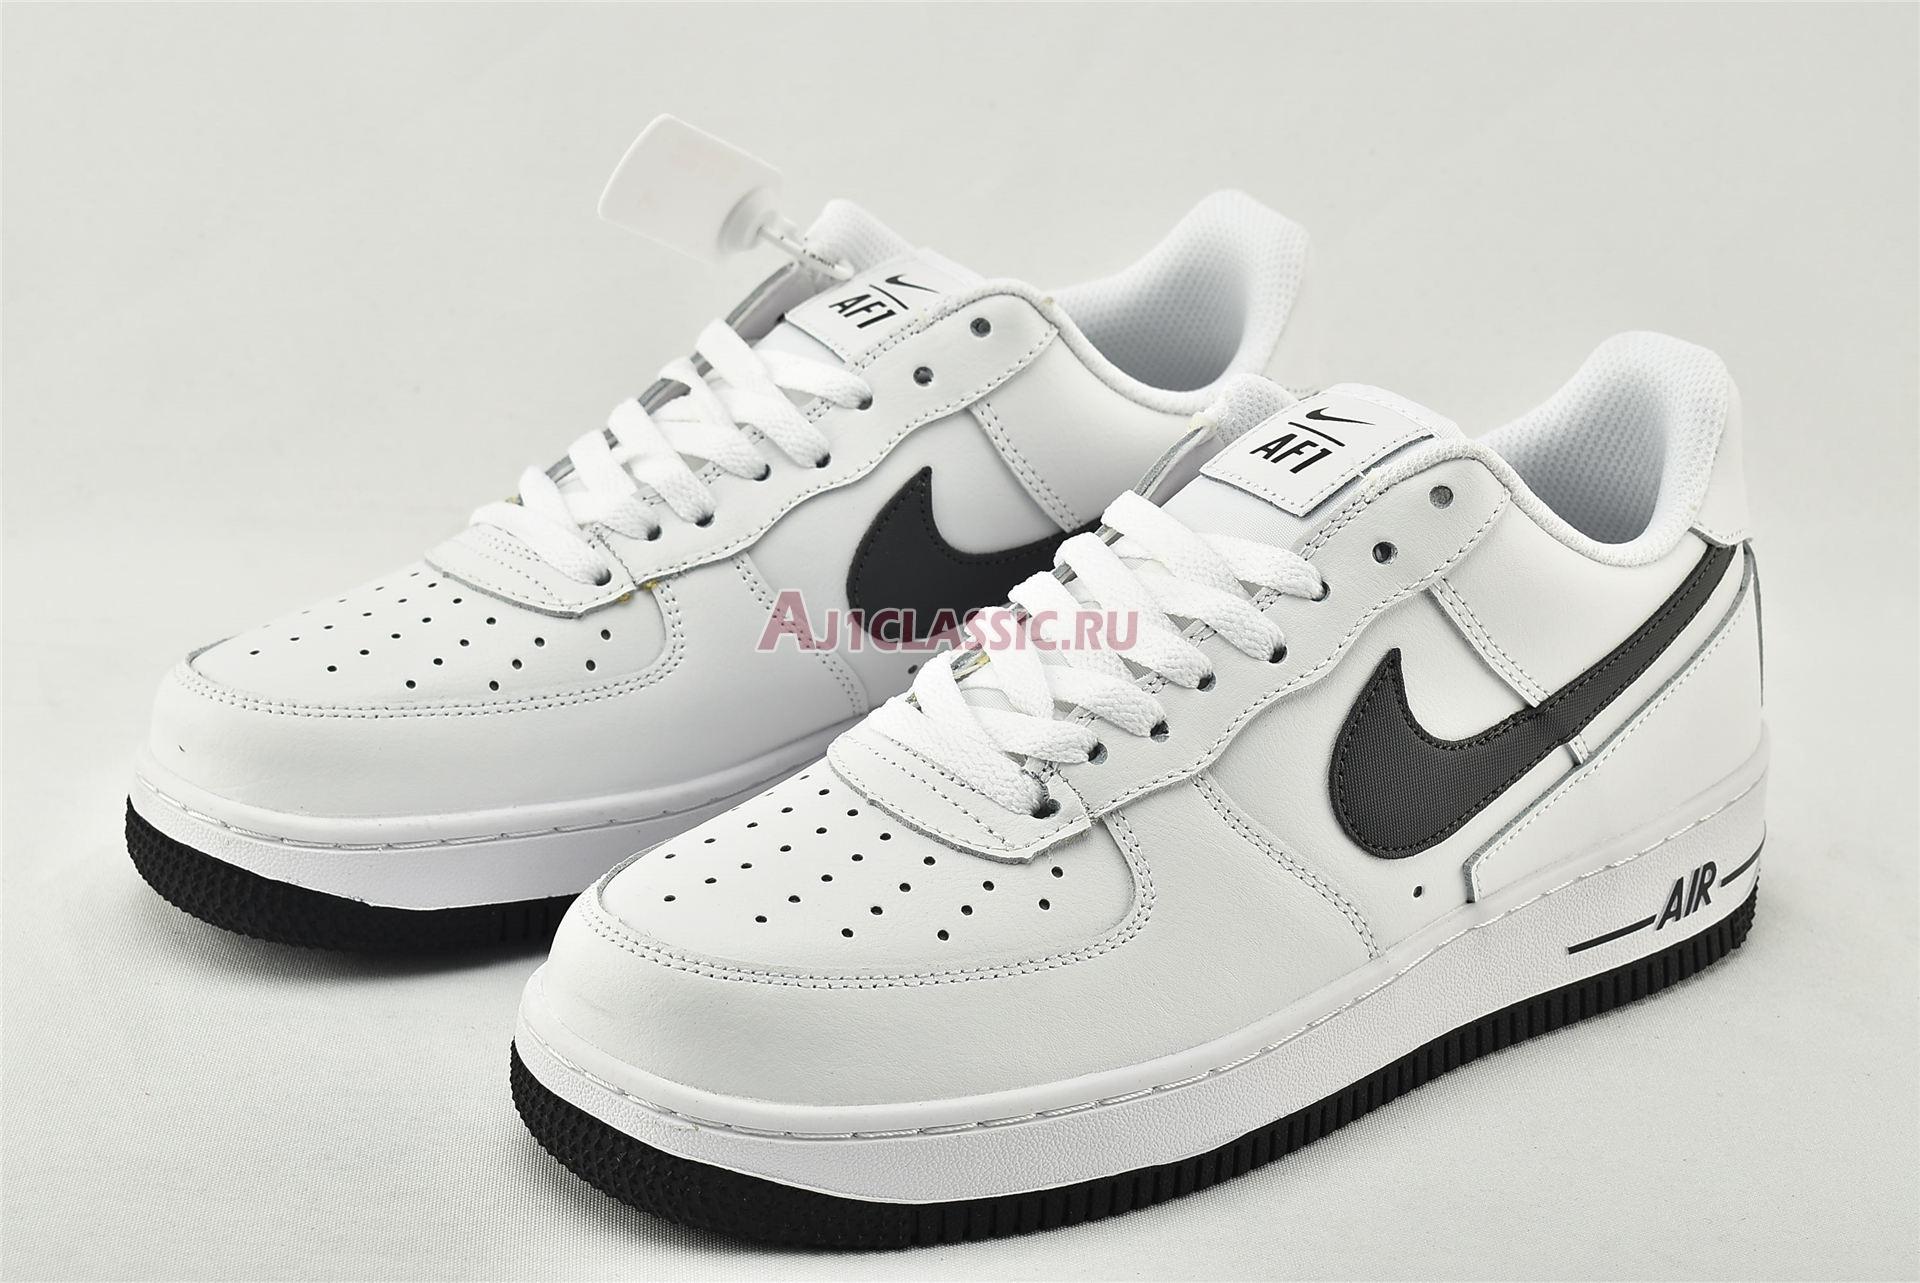 Nike Air Force 1 Low "White Iron Grey" DD7113-100